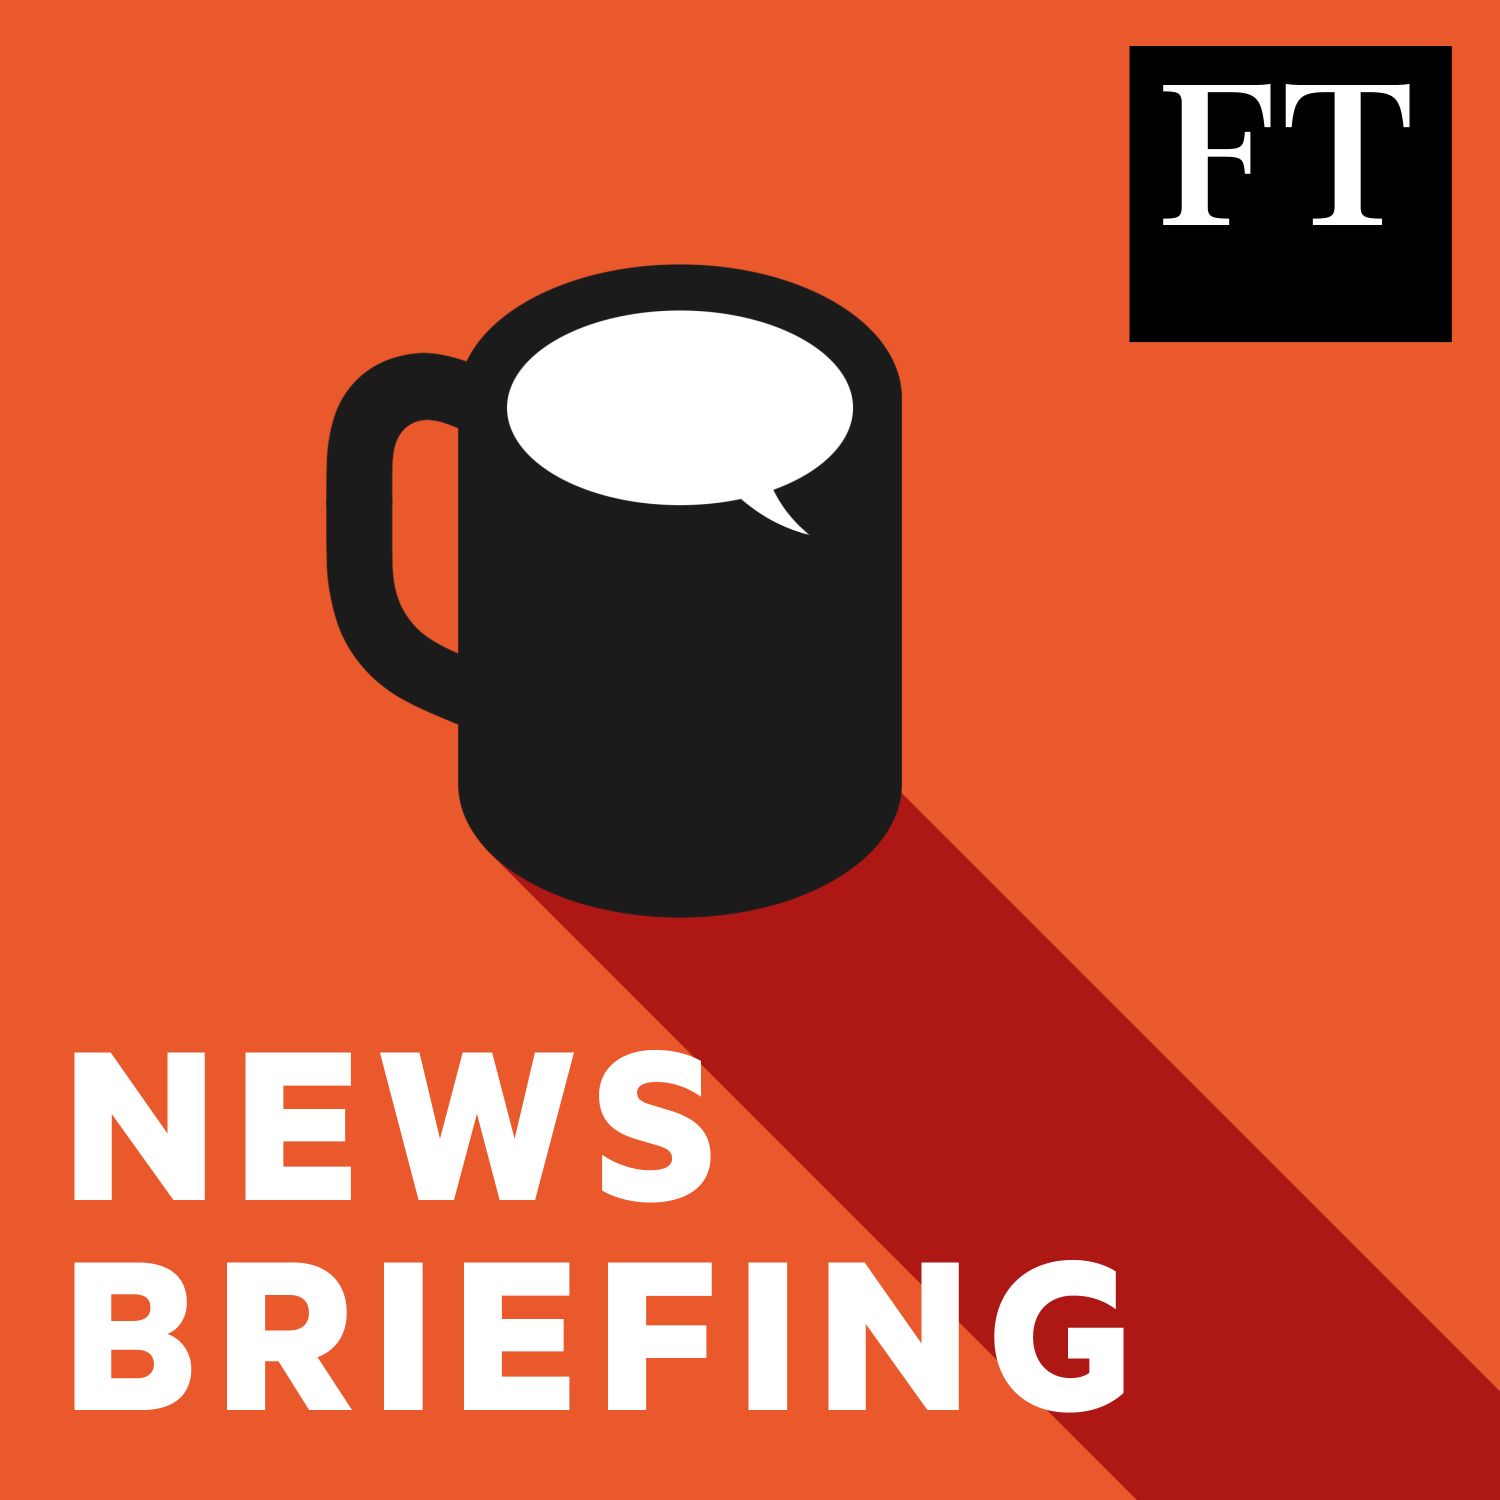 FT News Briefing - Podcast Addict